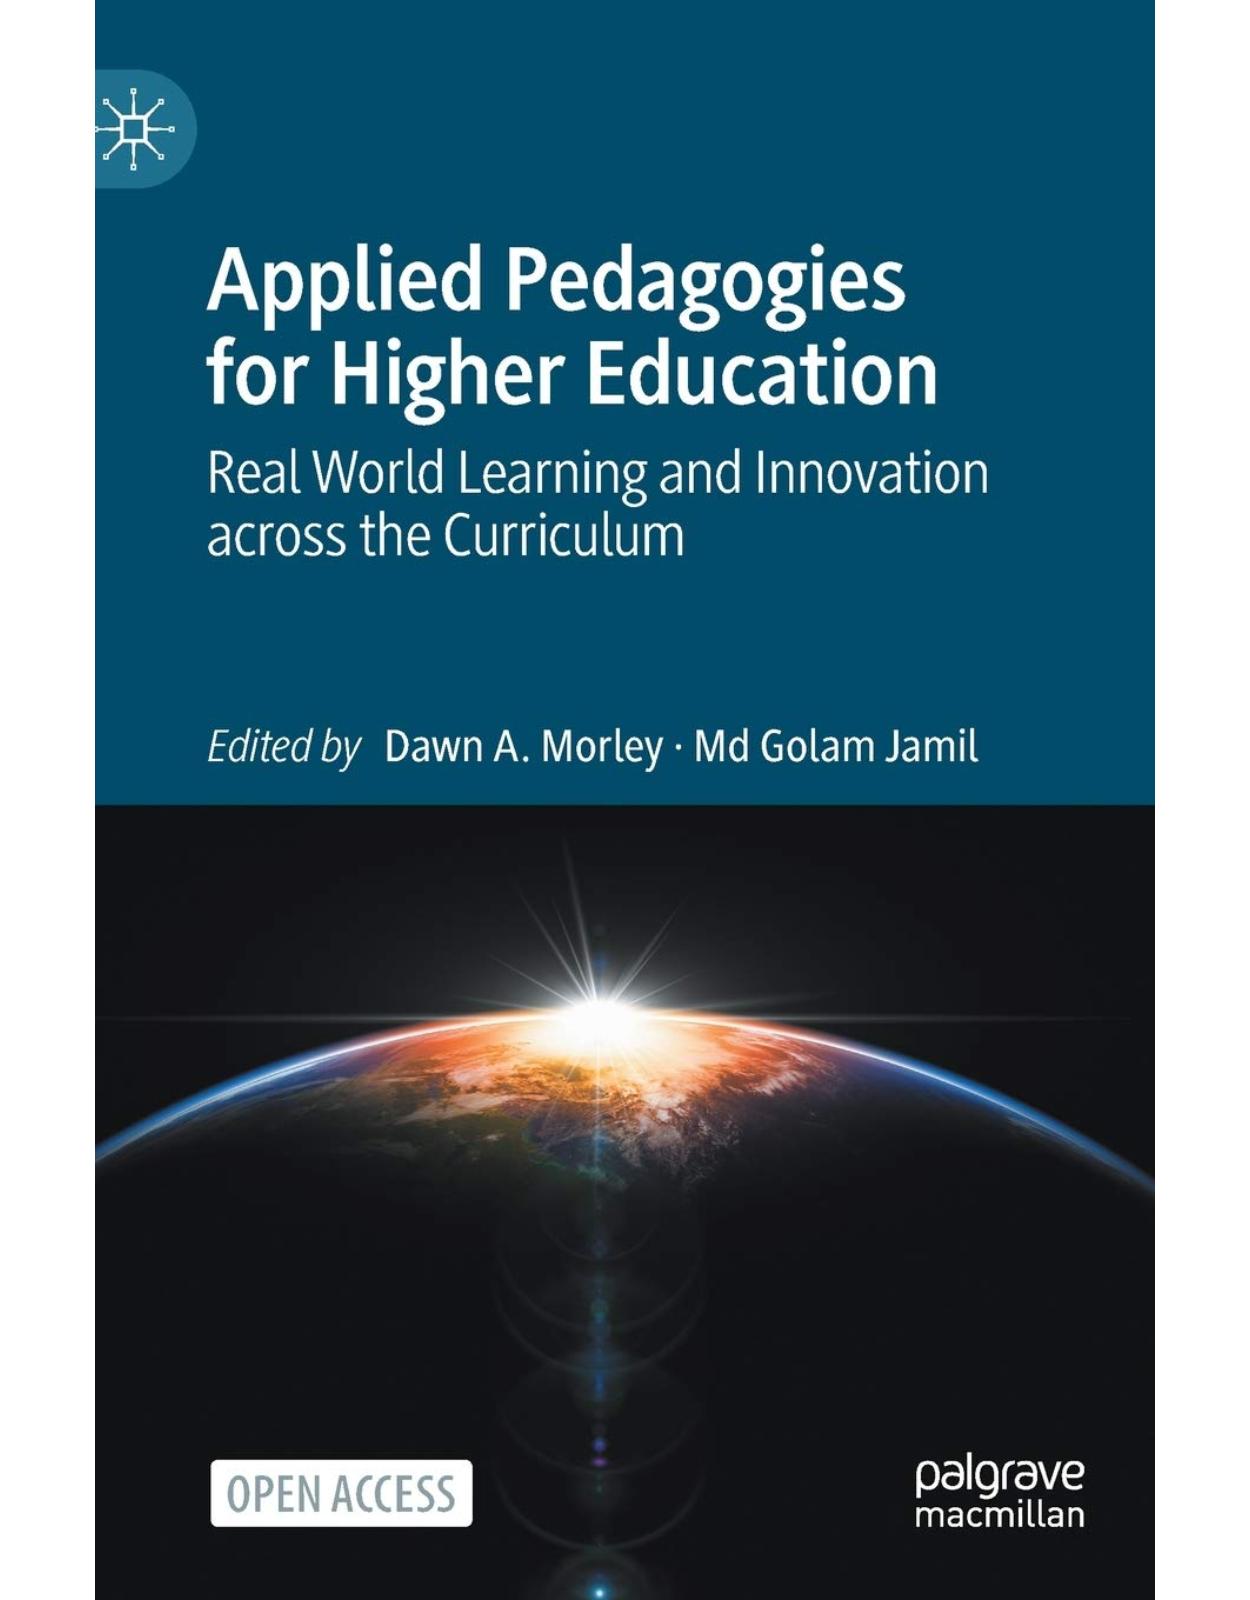 Applied Pedagogies for Higher Education: Real World Learning and Innovation across the Curriculum